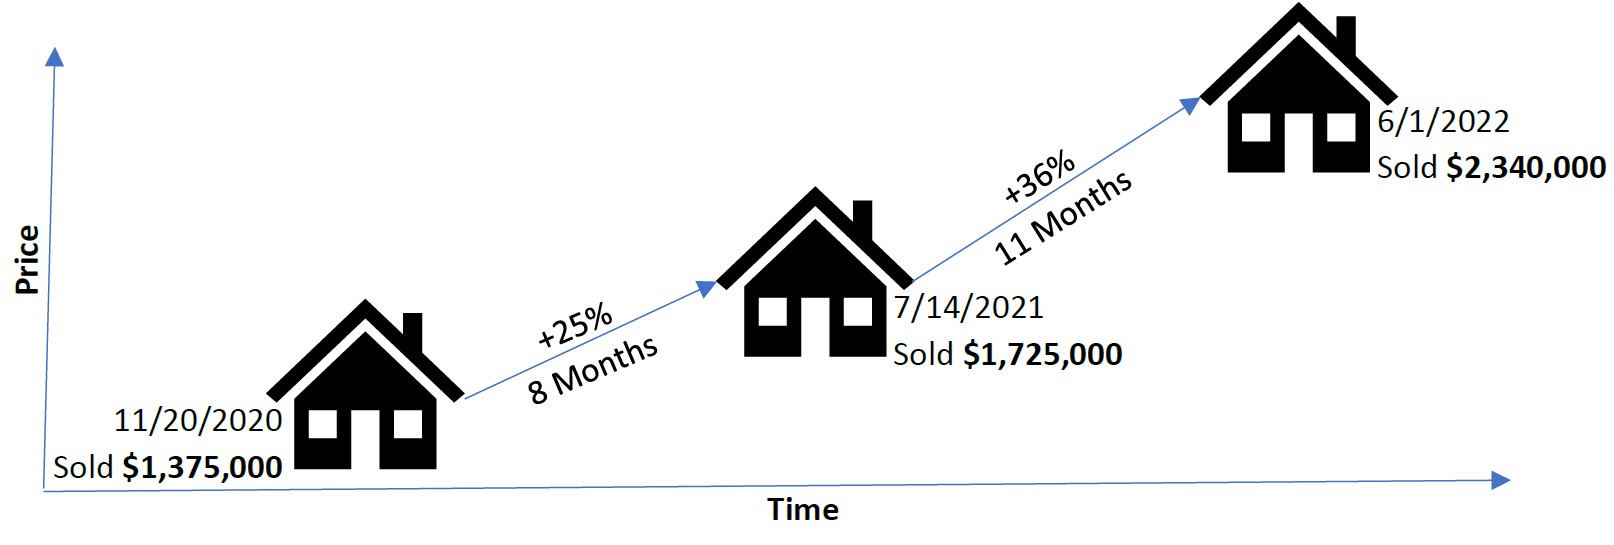 Time Adjustment Example - House Price over Time